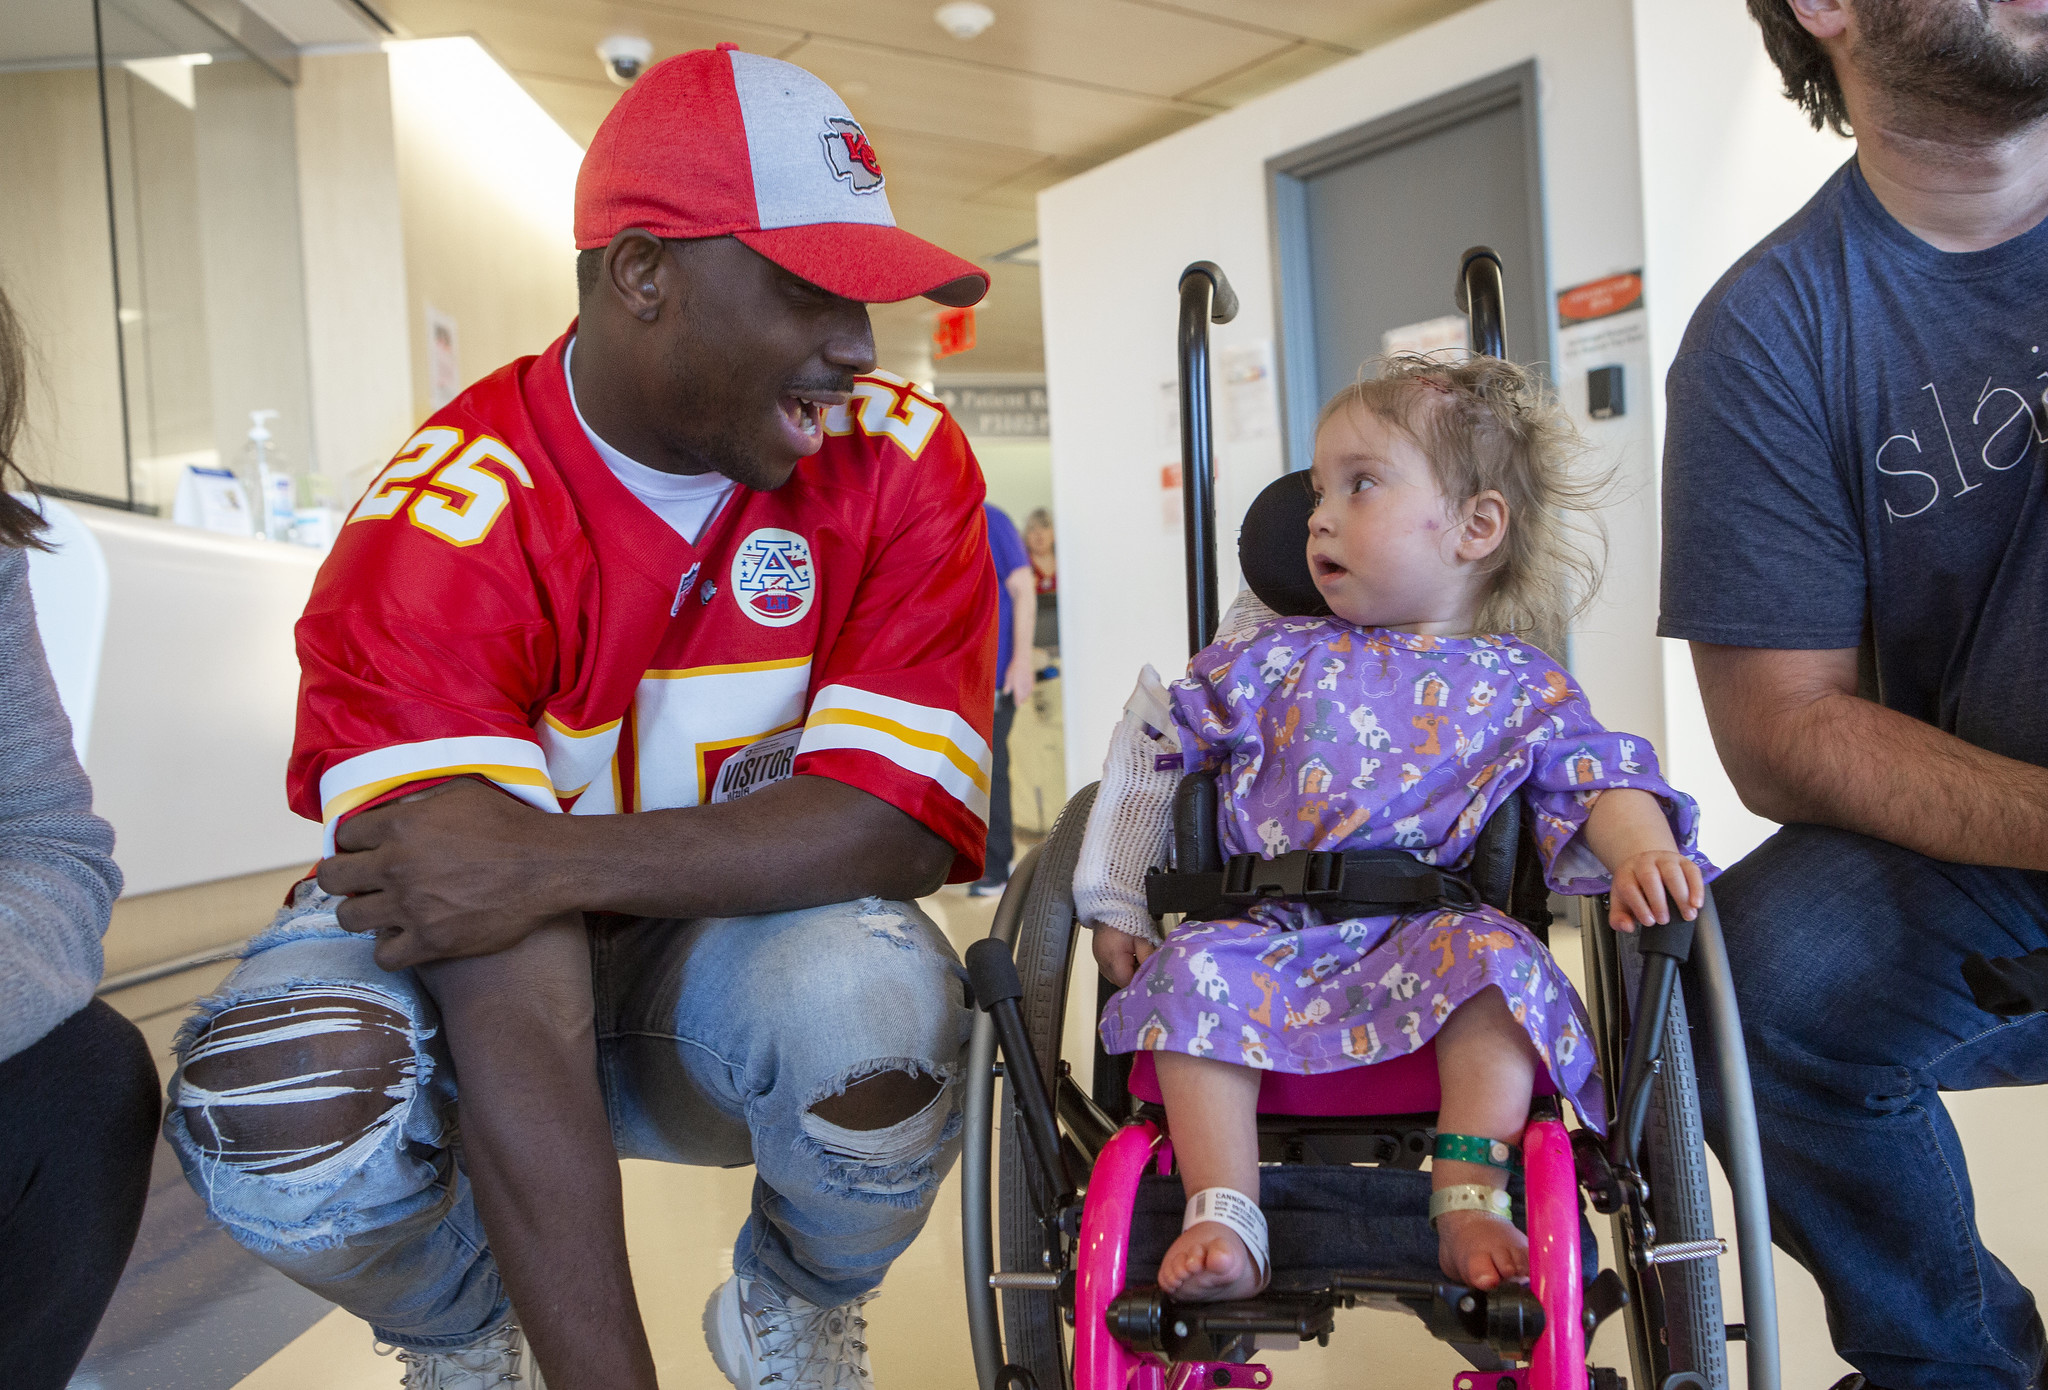 LeSean McCoy, wearing a Kansas City Chiefs uniform and hat, kneels down to talk with a young girl in a wheelchair. She looks back at him.